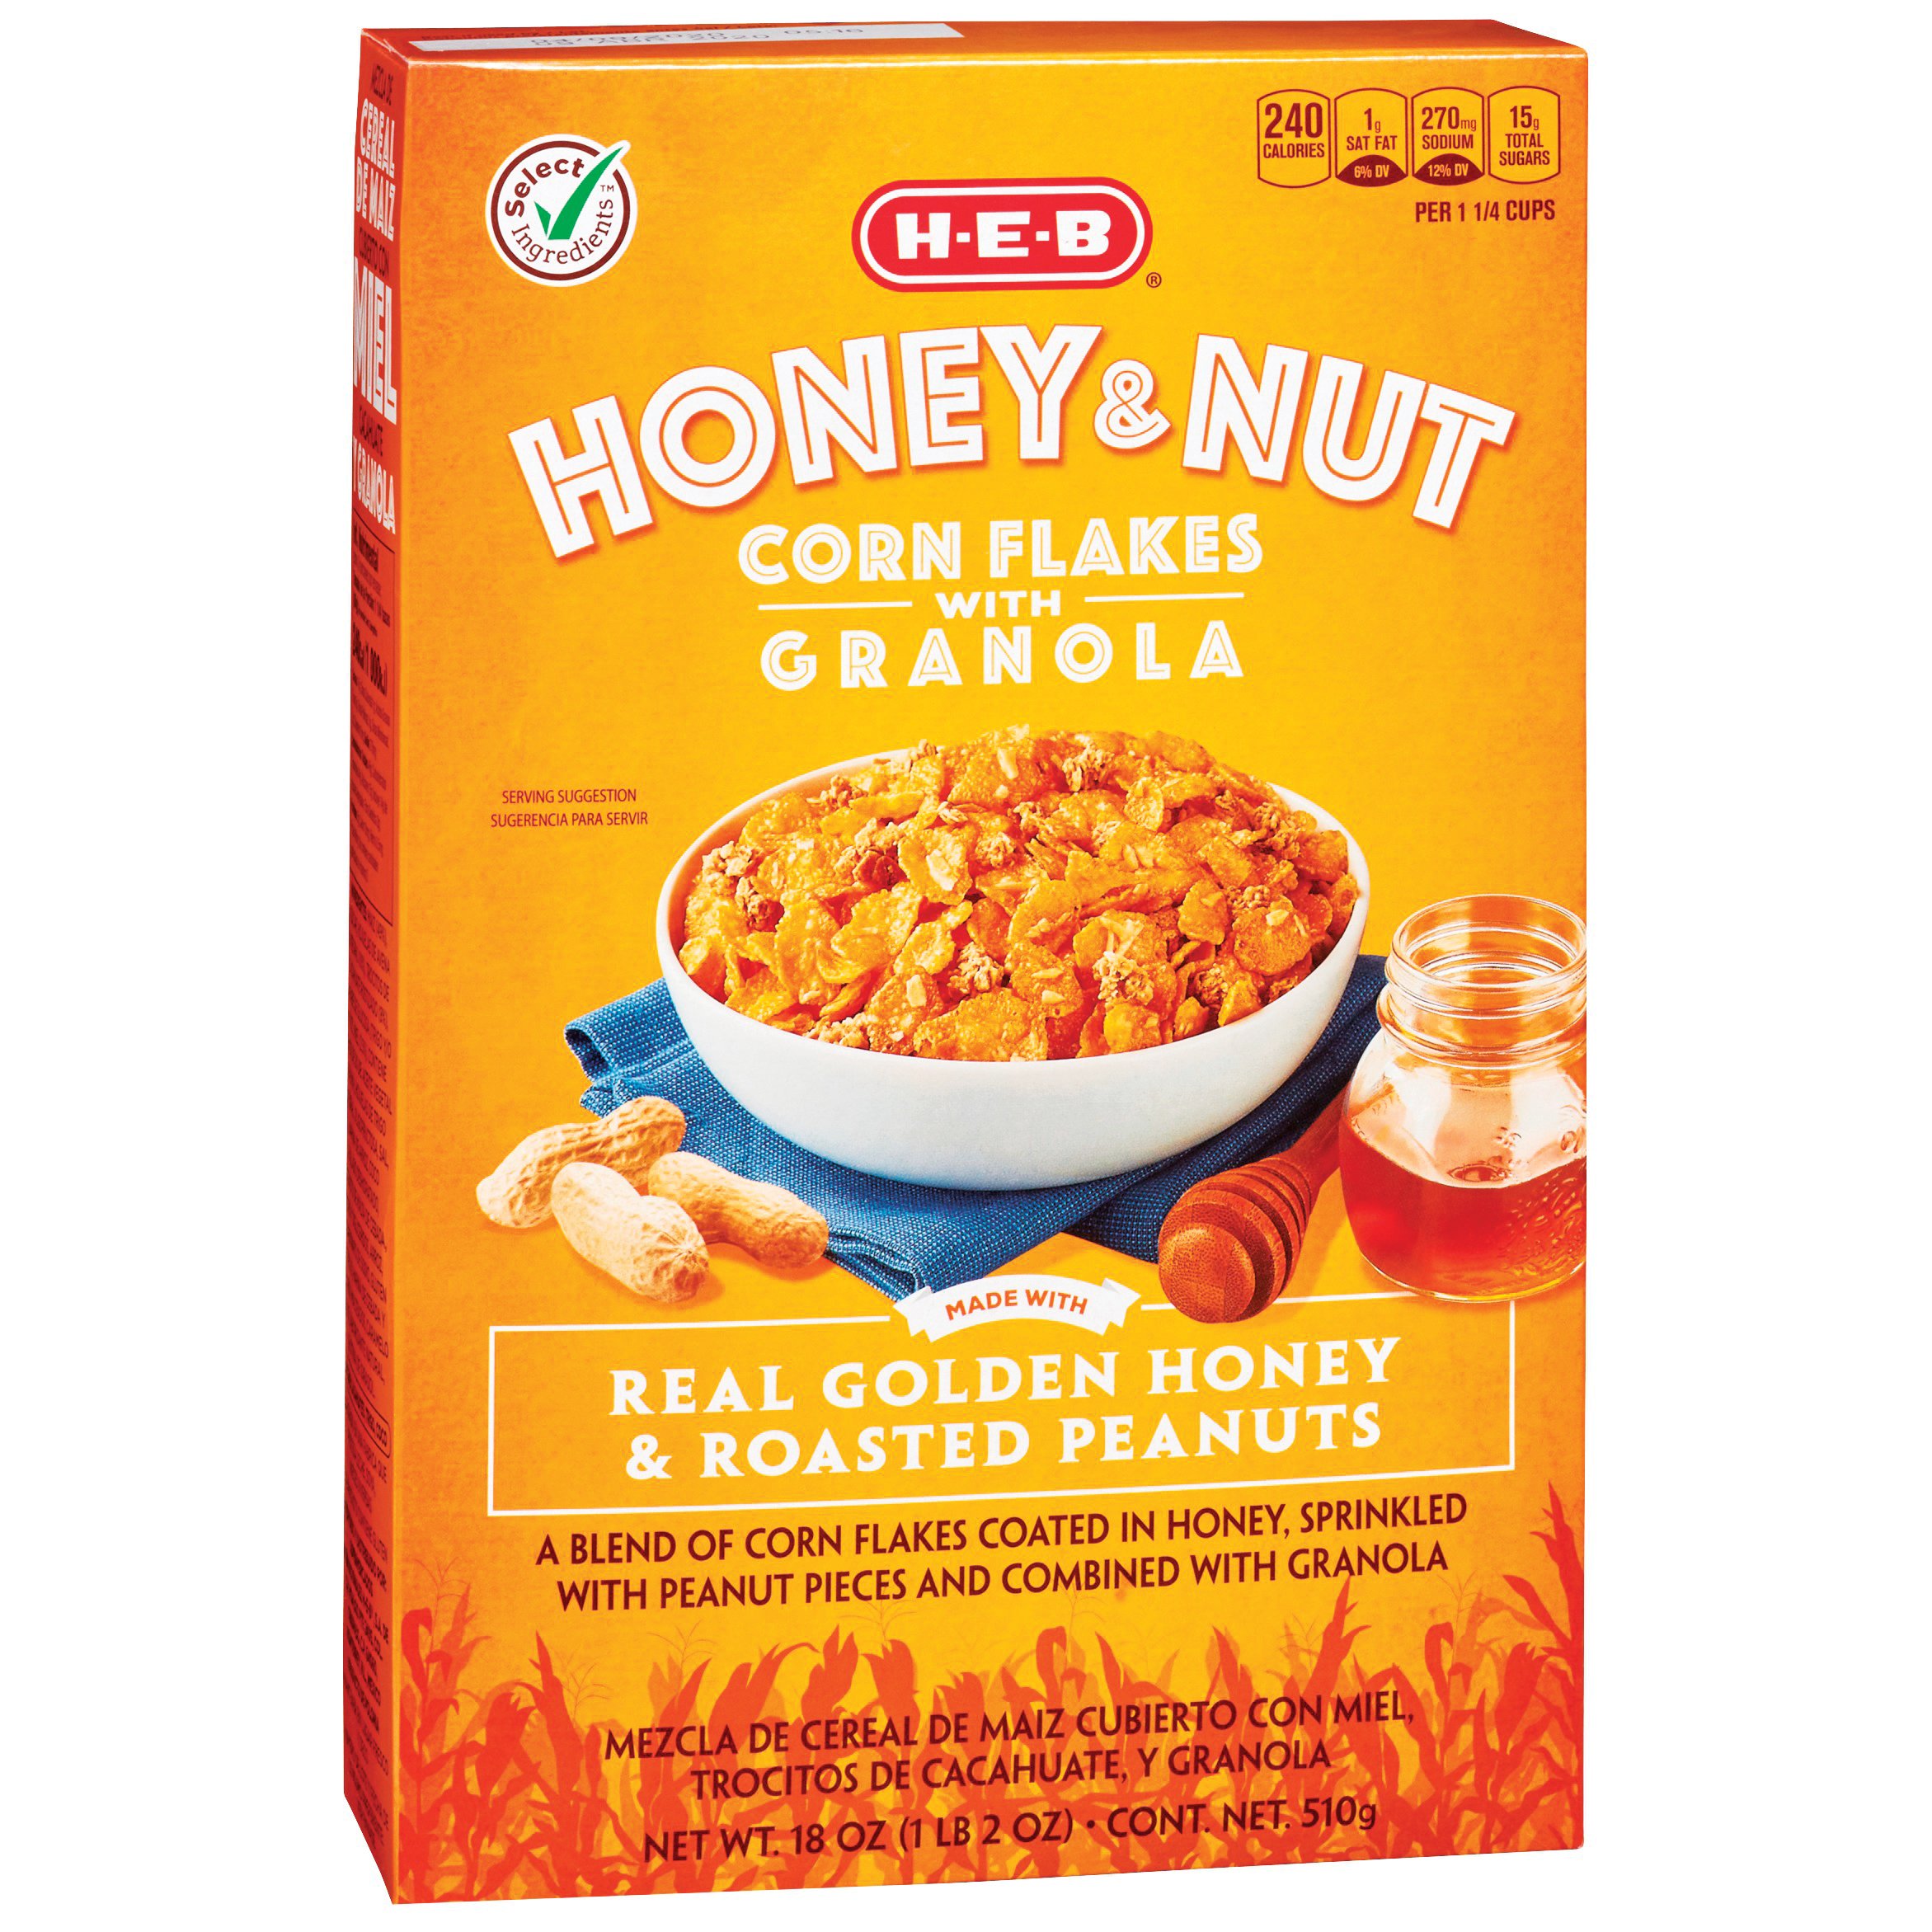 H-E-B Honey & Nut Corn Flakes Cereal with Granola - Shop Cereal at